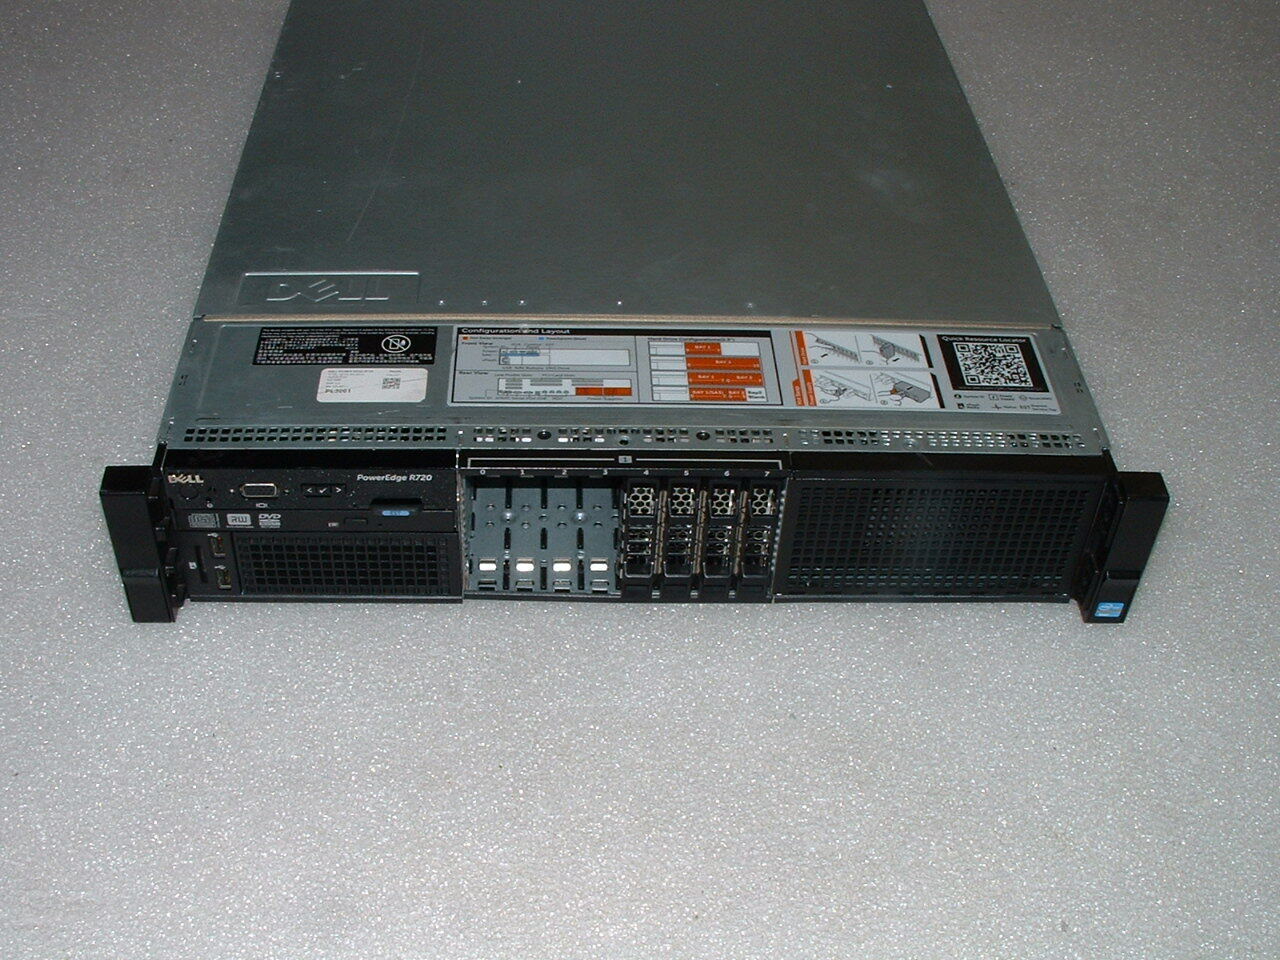 Dell Poweredge R720 2x Xeon E5-2650 v2 2.6GHz 16-Cores / No RAM or HDD / H710